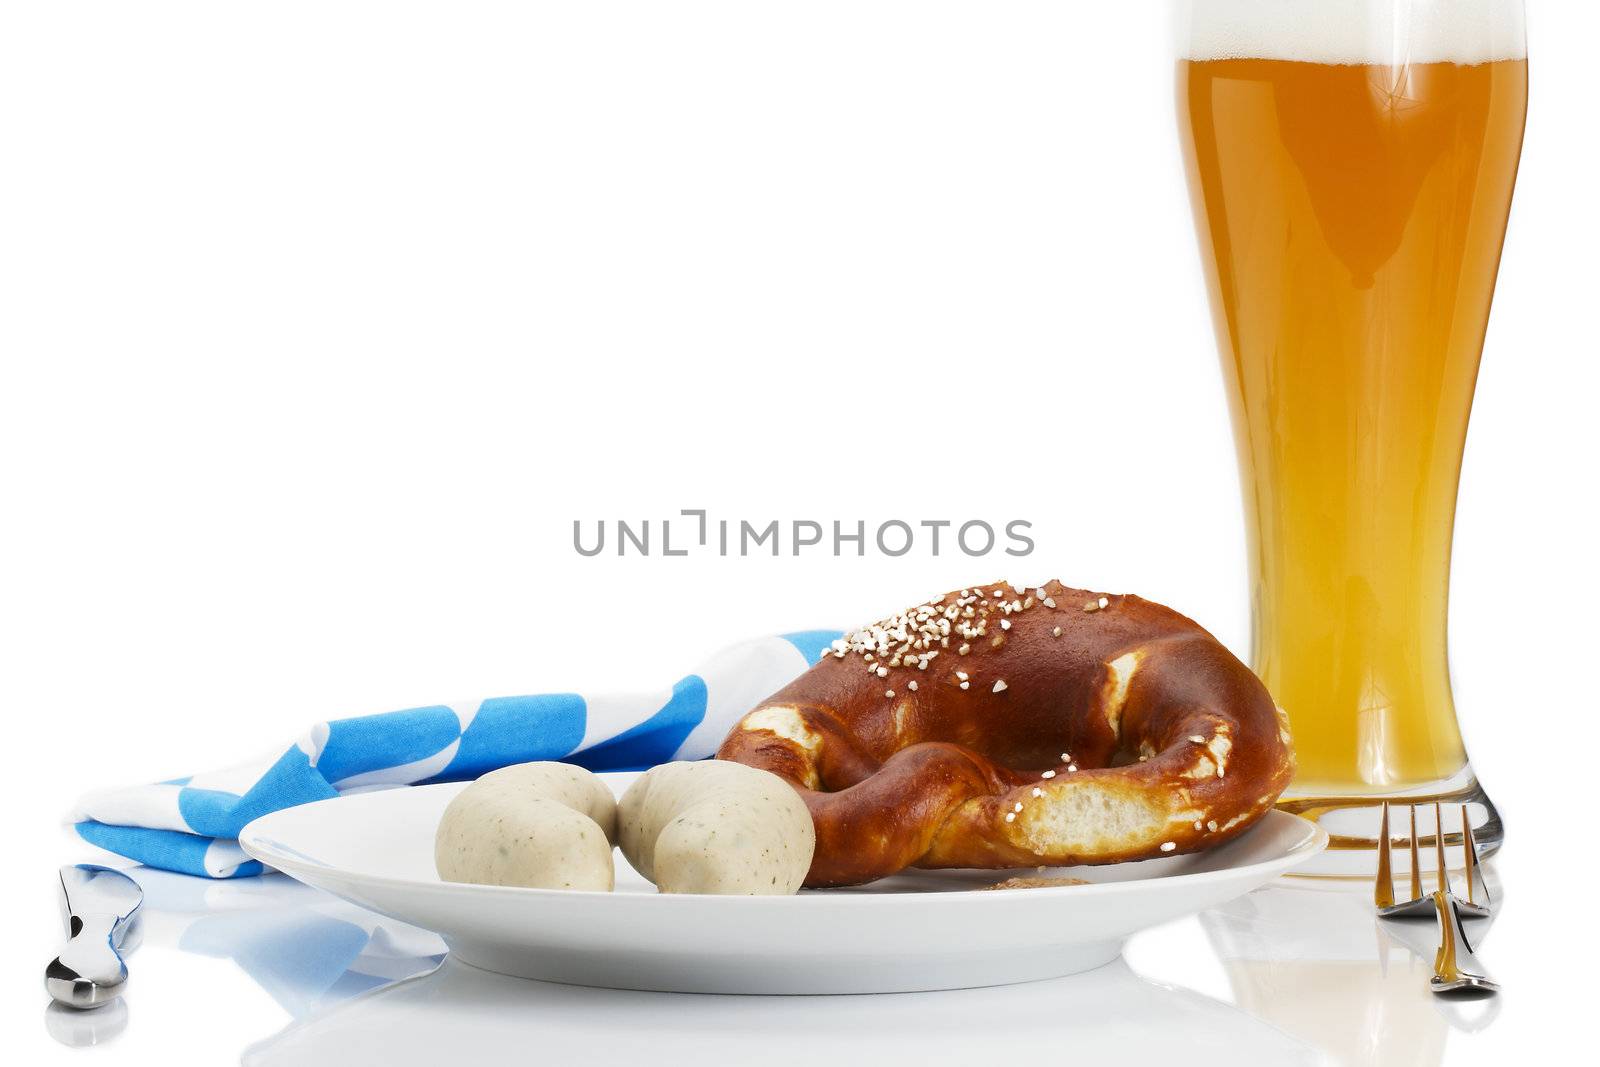 bavarian veal sauages on a plate with beer, pretzel and bavarian towel on white background